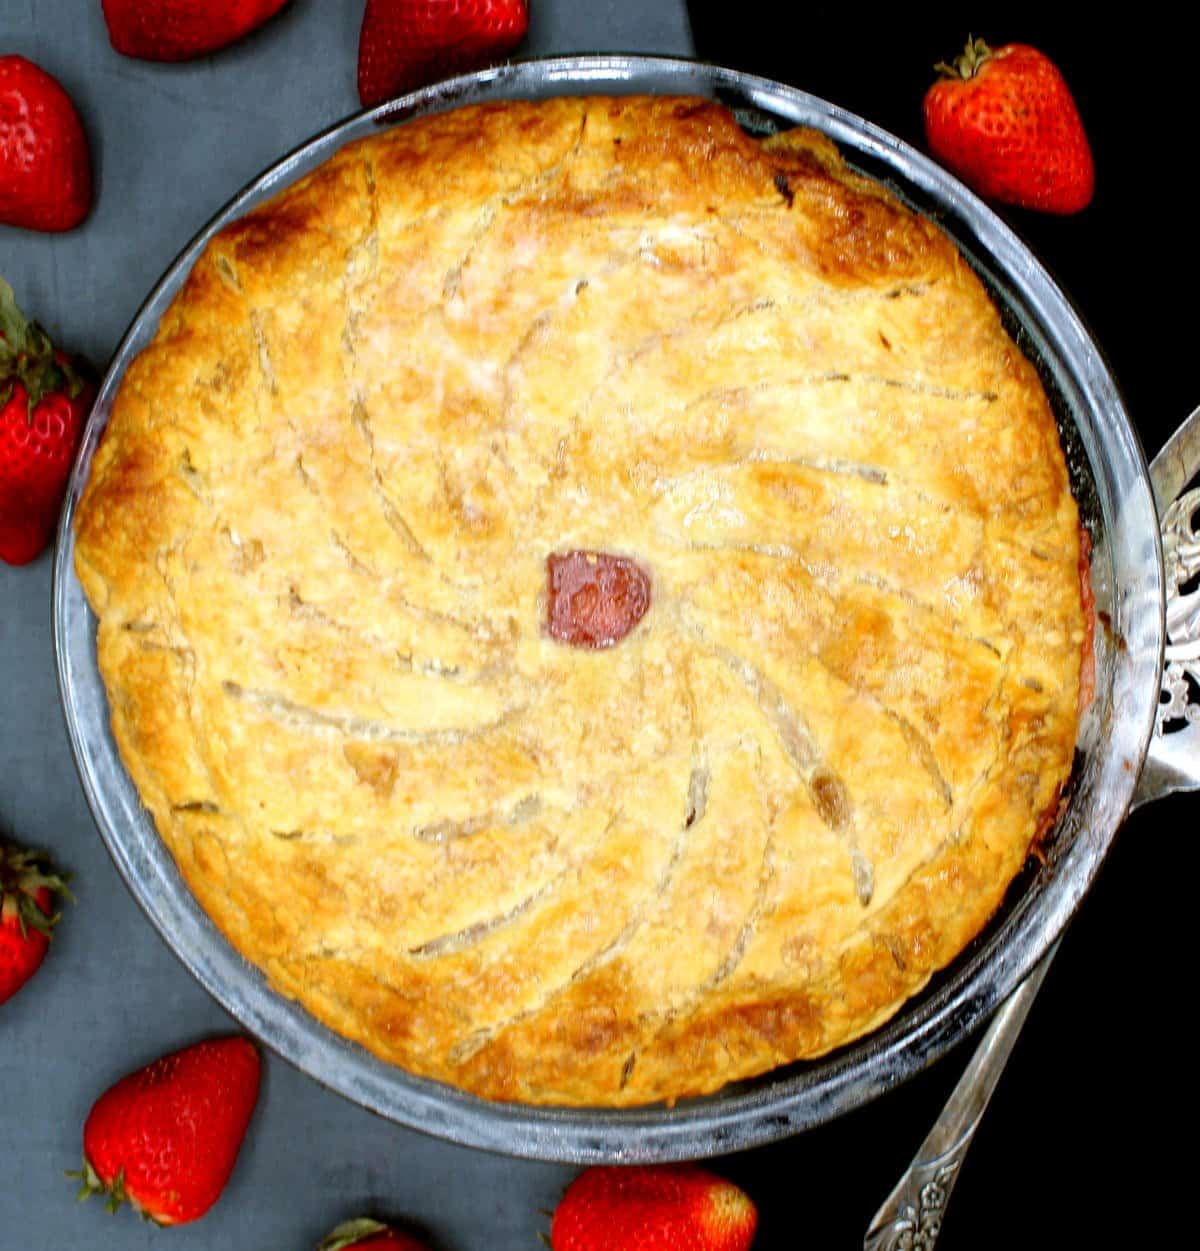 A vegan strawberry rhubarb pithivier in pie plate with strawberries scattered around.